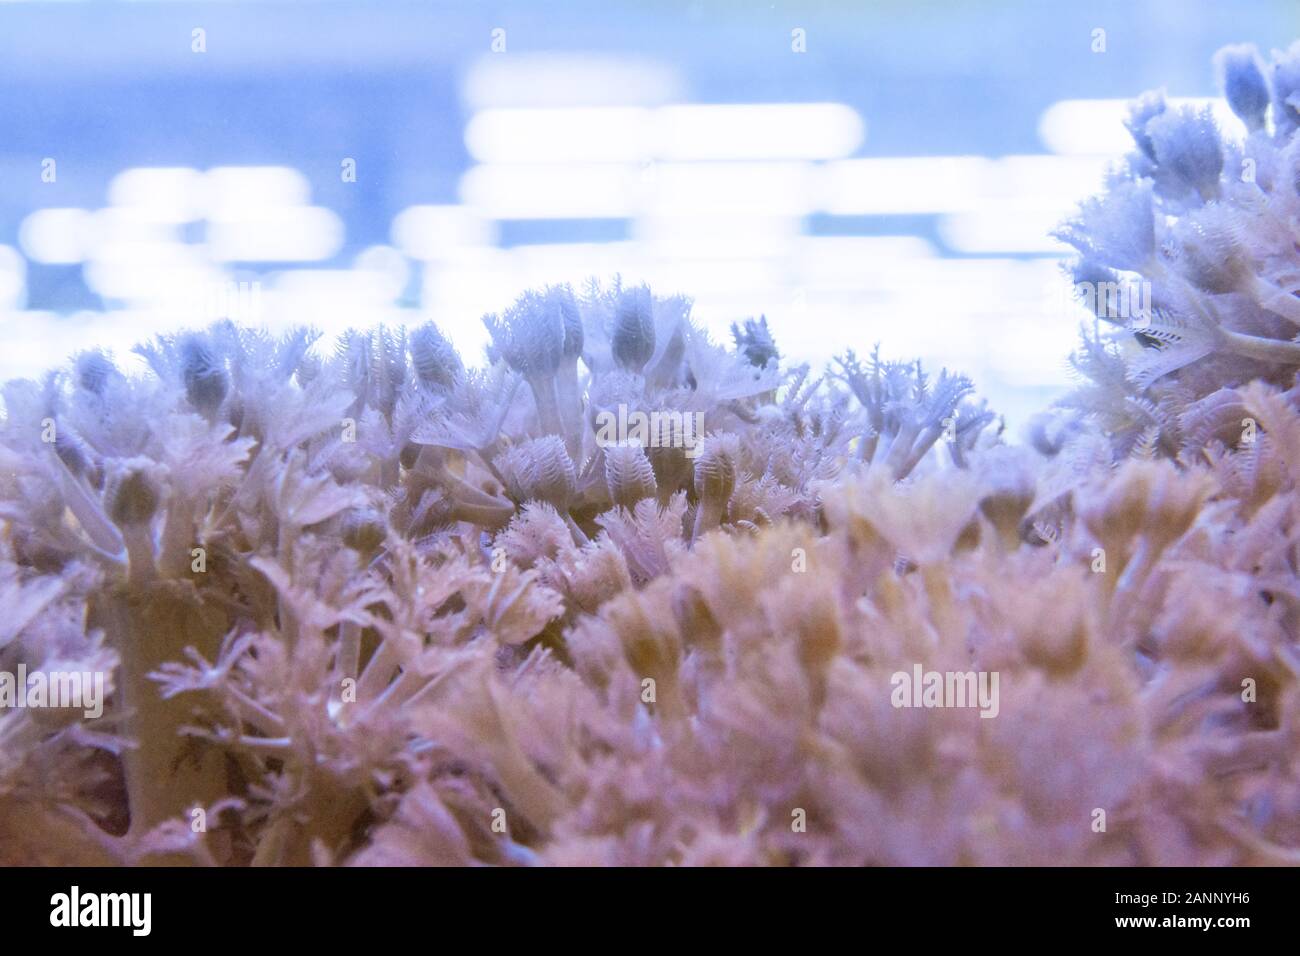 Living corals are very close Stock Photo